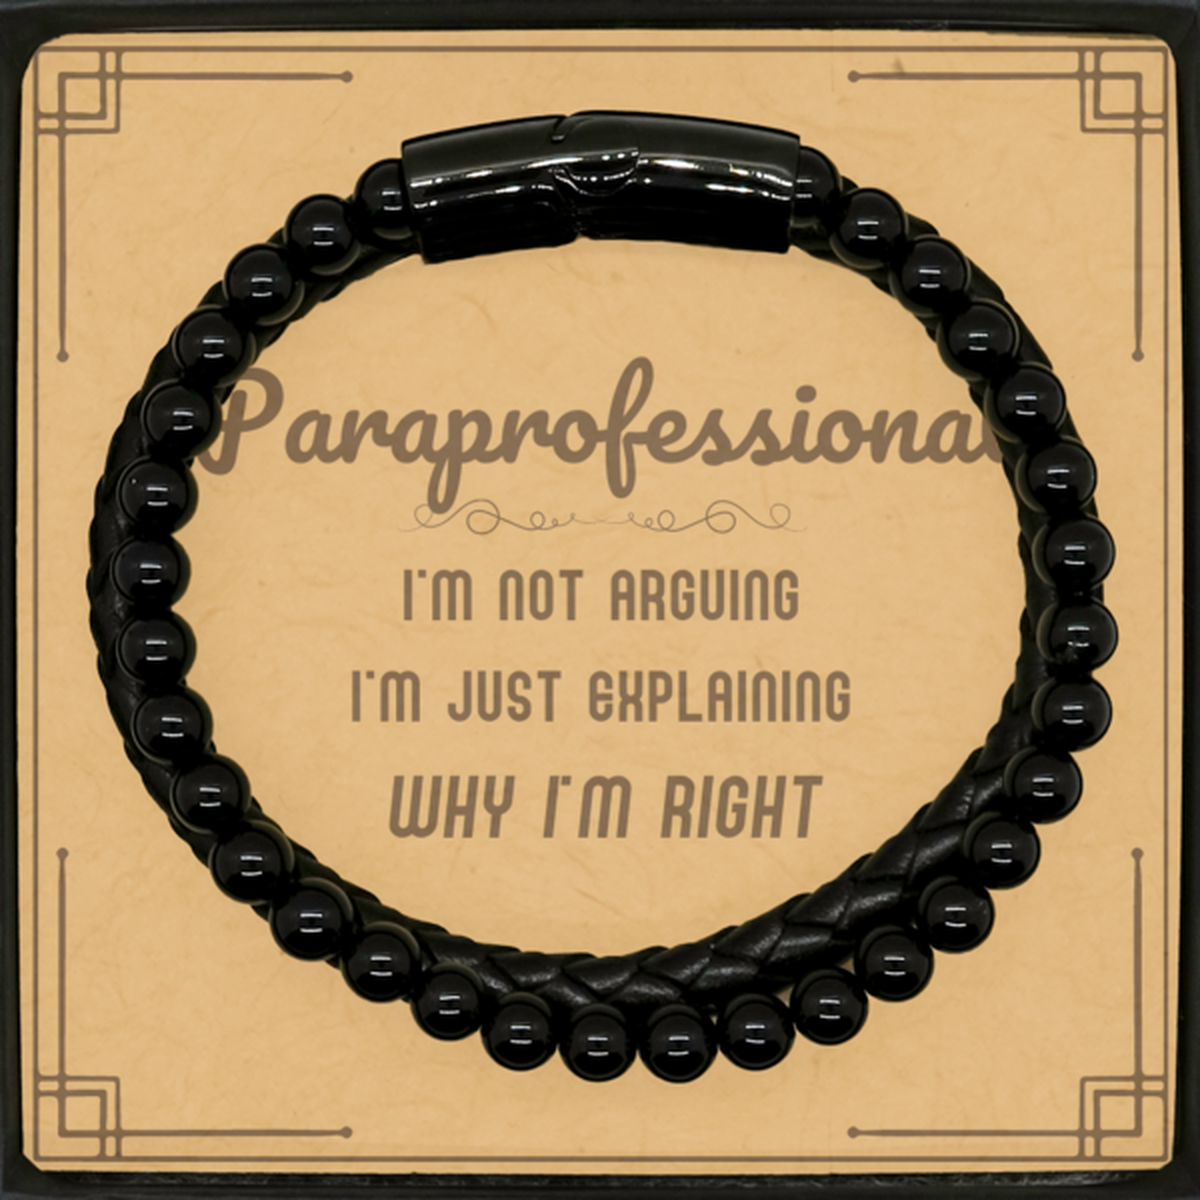 Paraprofessional I'm not Arguing. I'm Just Explaining Why I'm RIGHT Stone Leather Bracelets, Funny Saying Quote Paraprofessional Gifts For Paraprofessional Message Card Graduation Birthday Christmas Gifts for Men Women Coworker